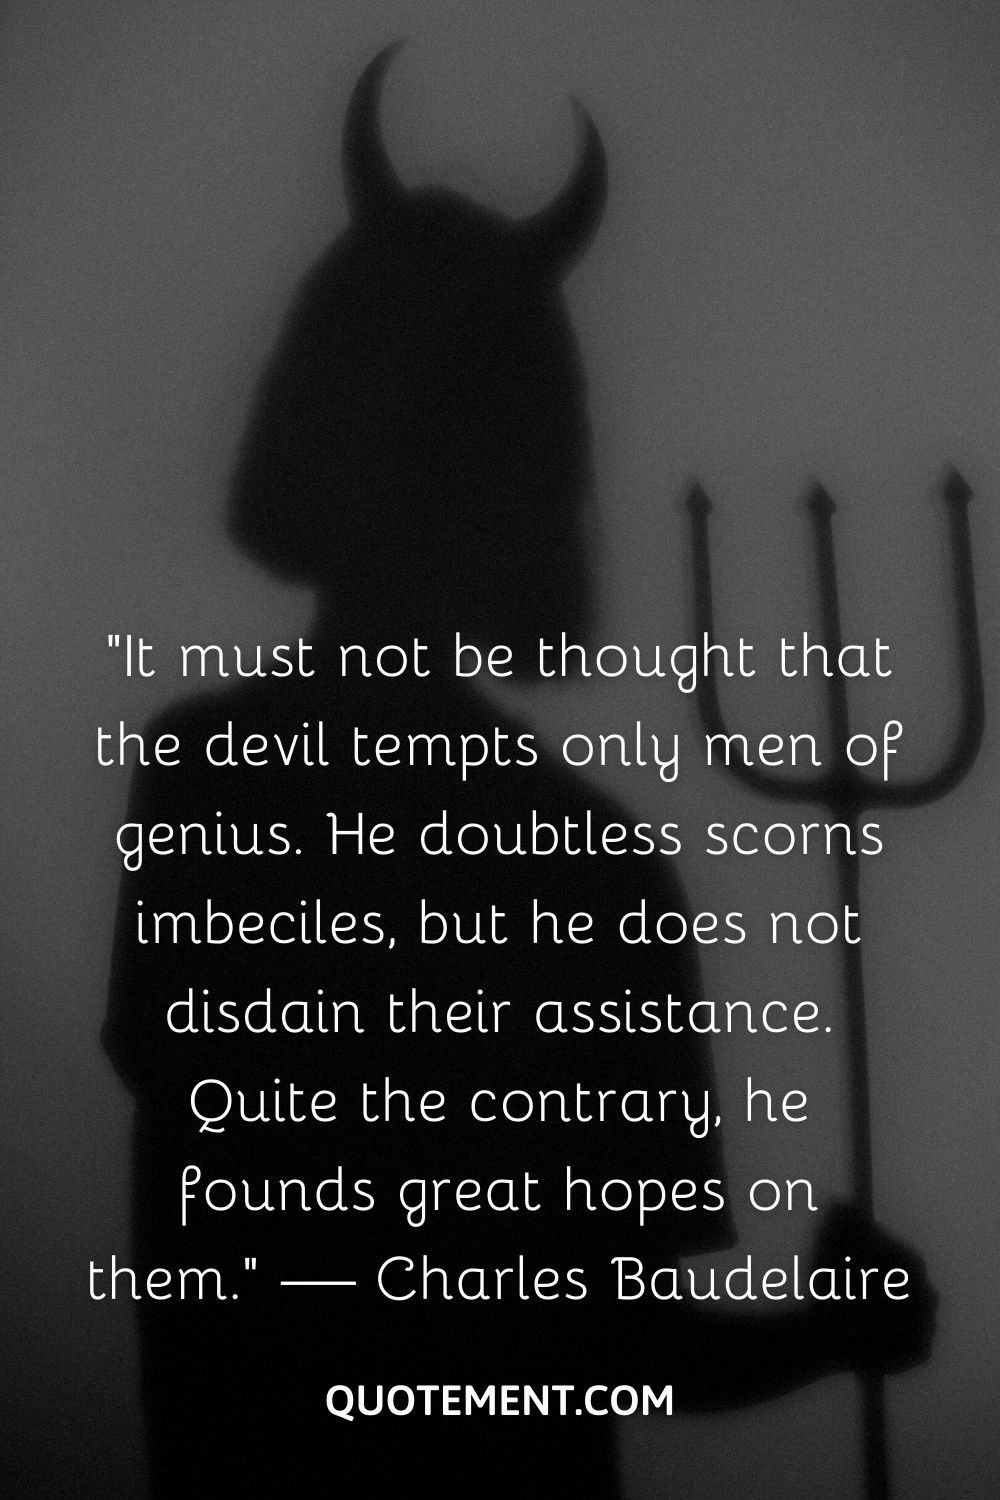 “It must not be thought that the devil tempts only men of genius. He doubtless scorns imbeciles, but he does not disdain their assistance.